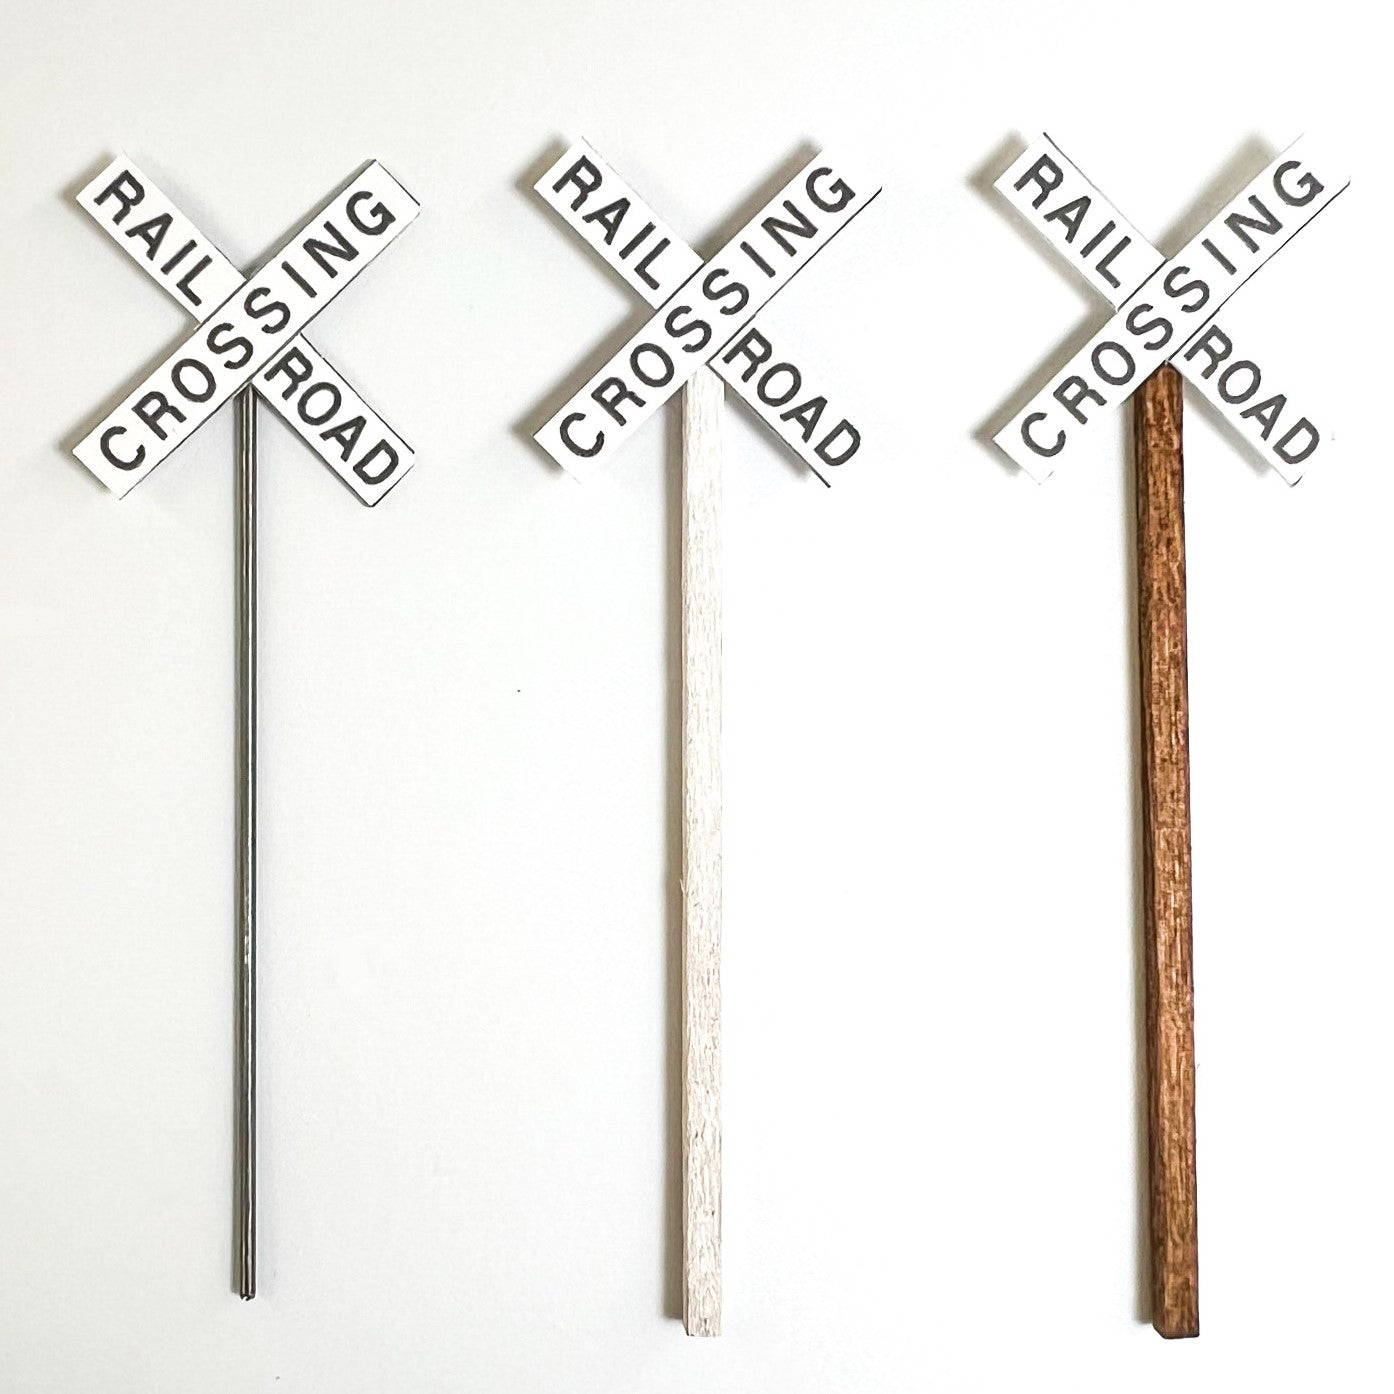 Model Railroad Modern Crossbuck signs with metal pole, white wood or brown wood posts